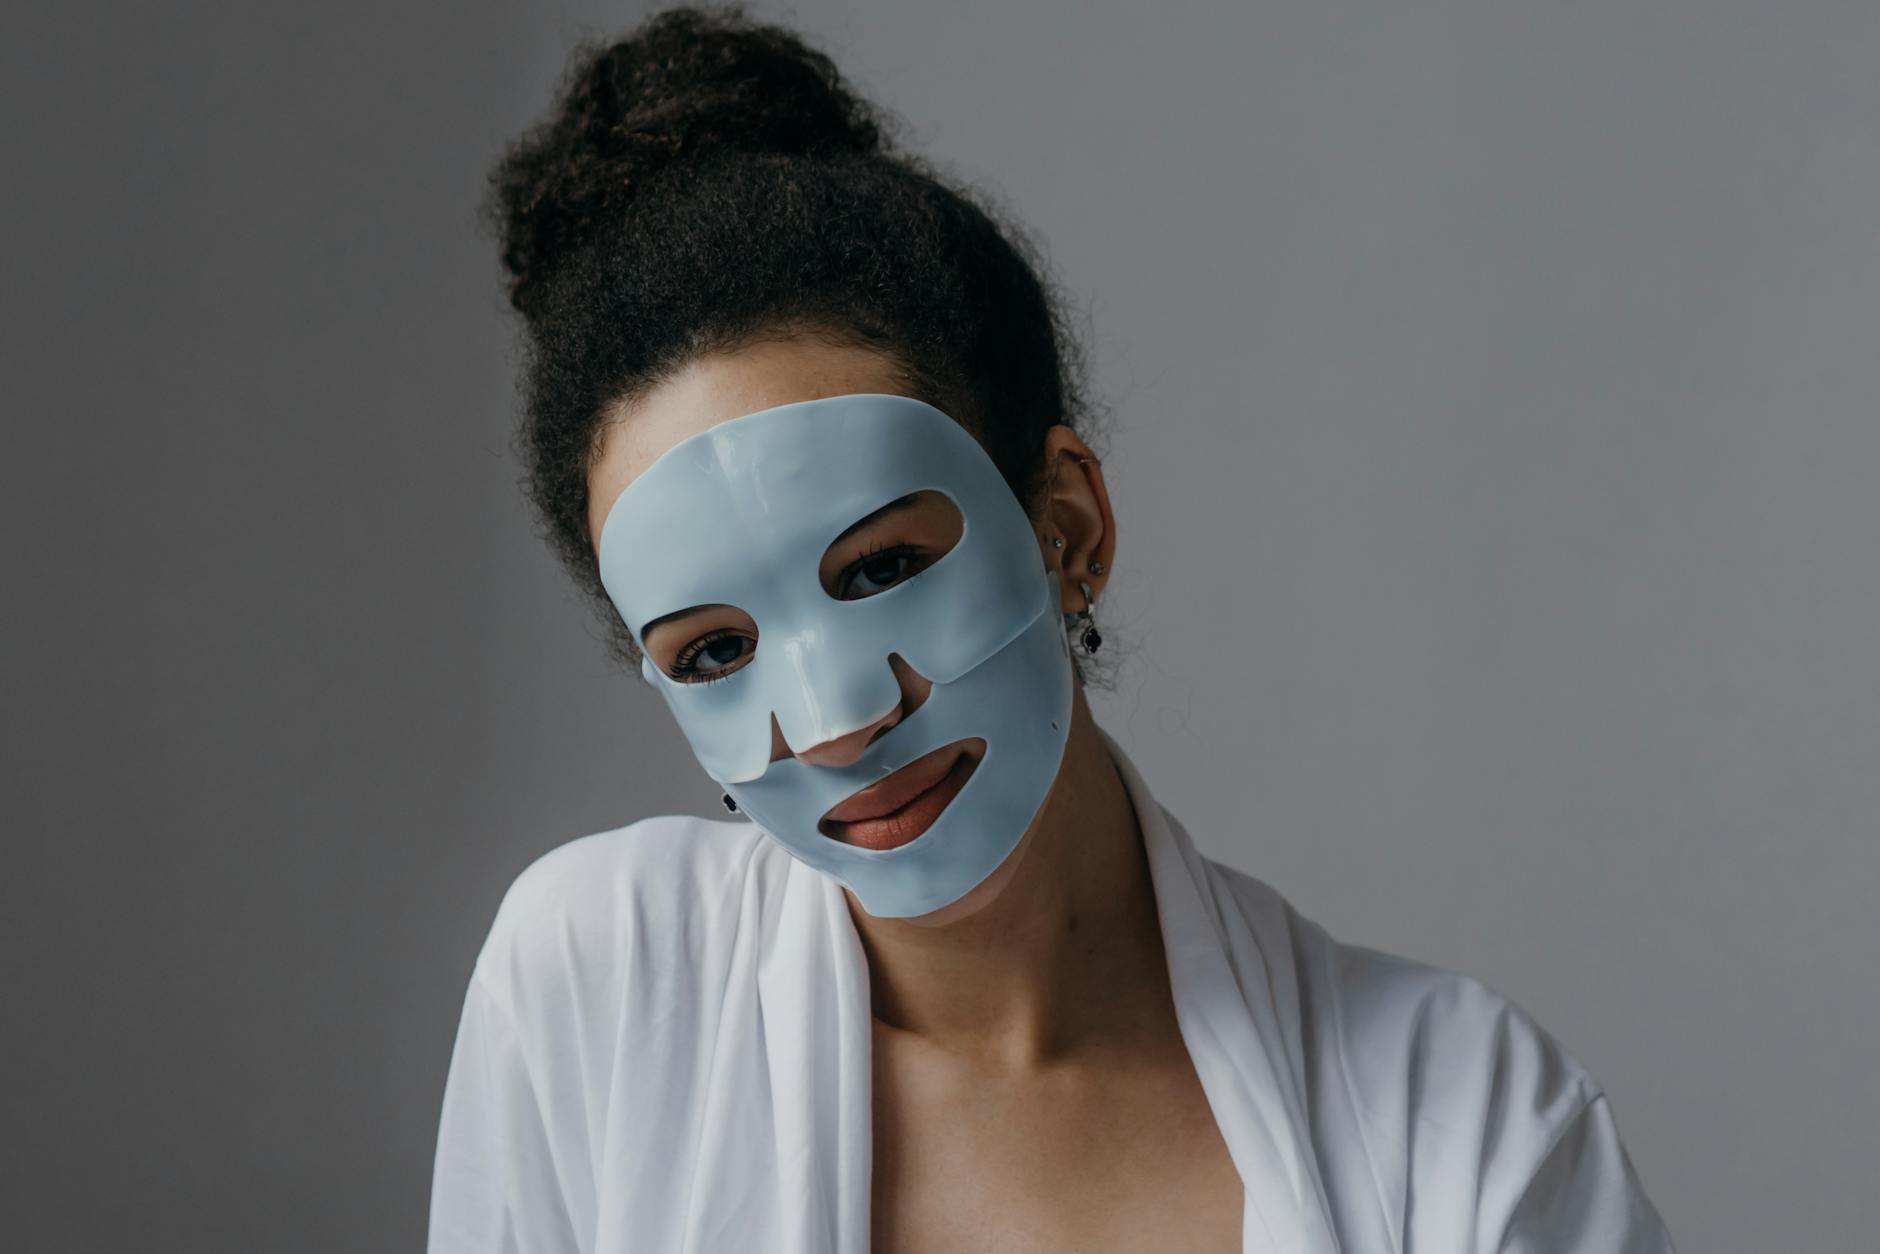 Woman with Facial Mask